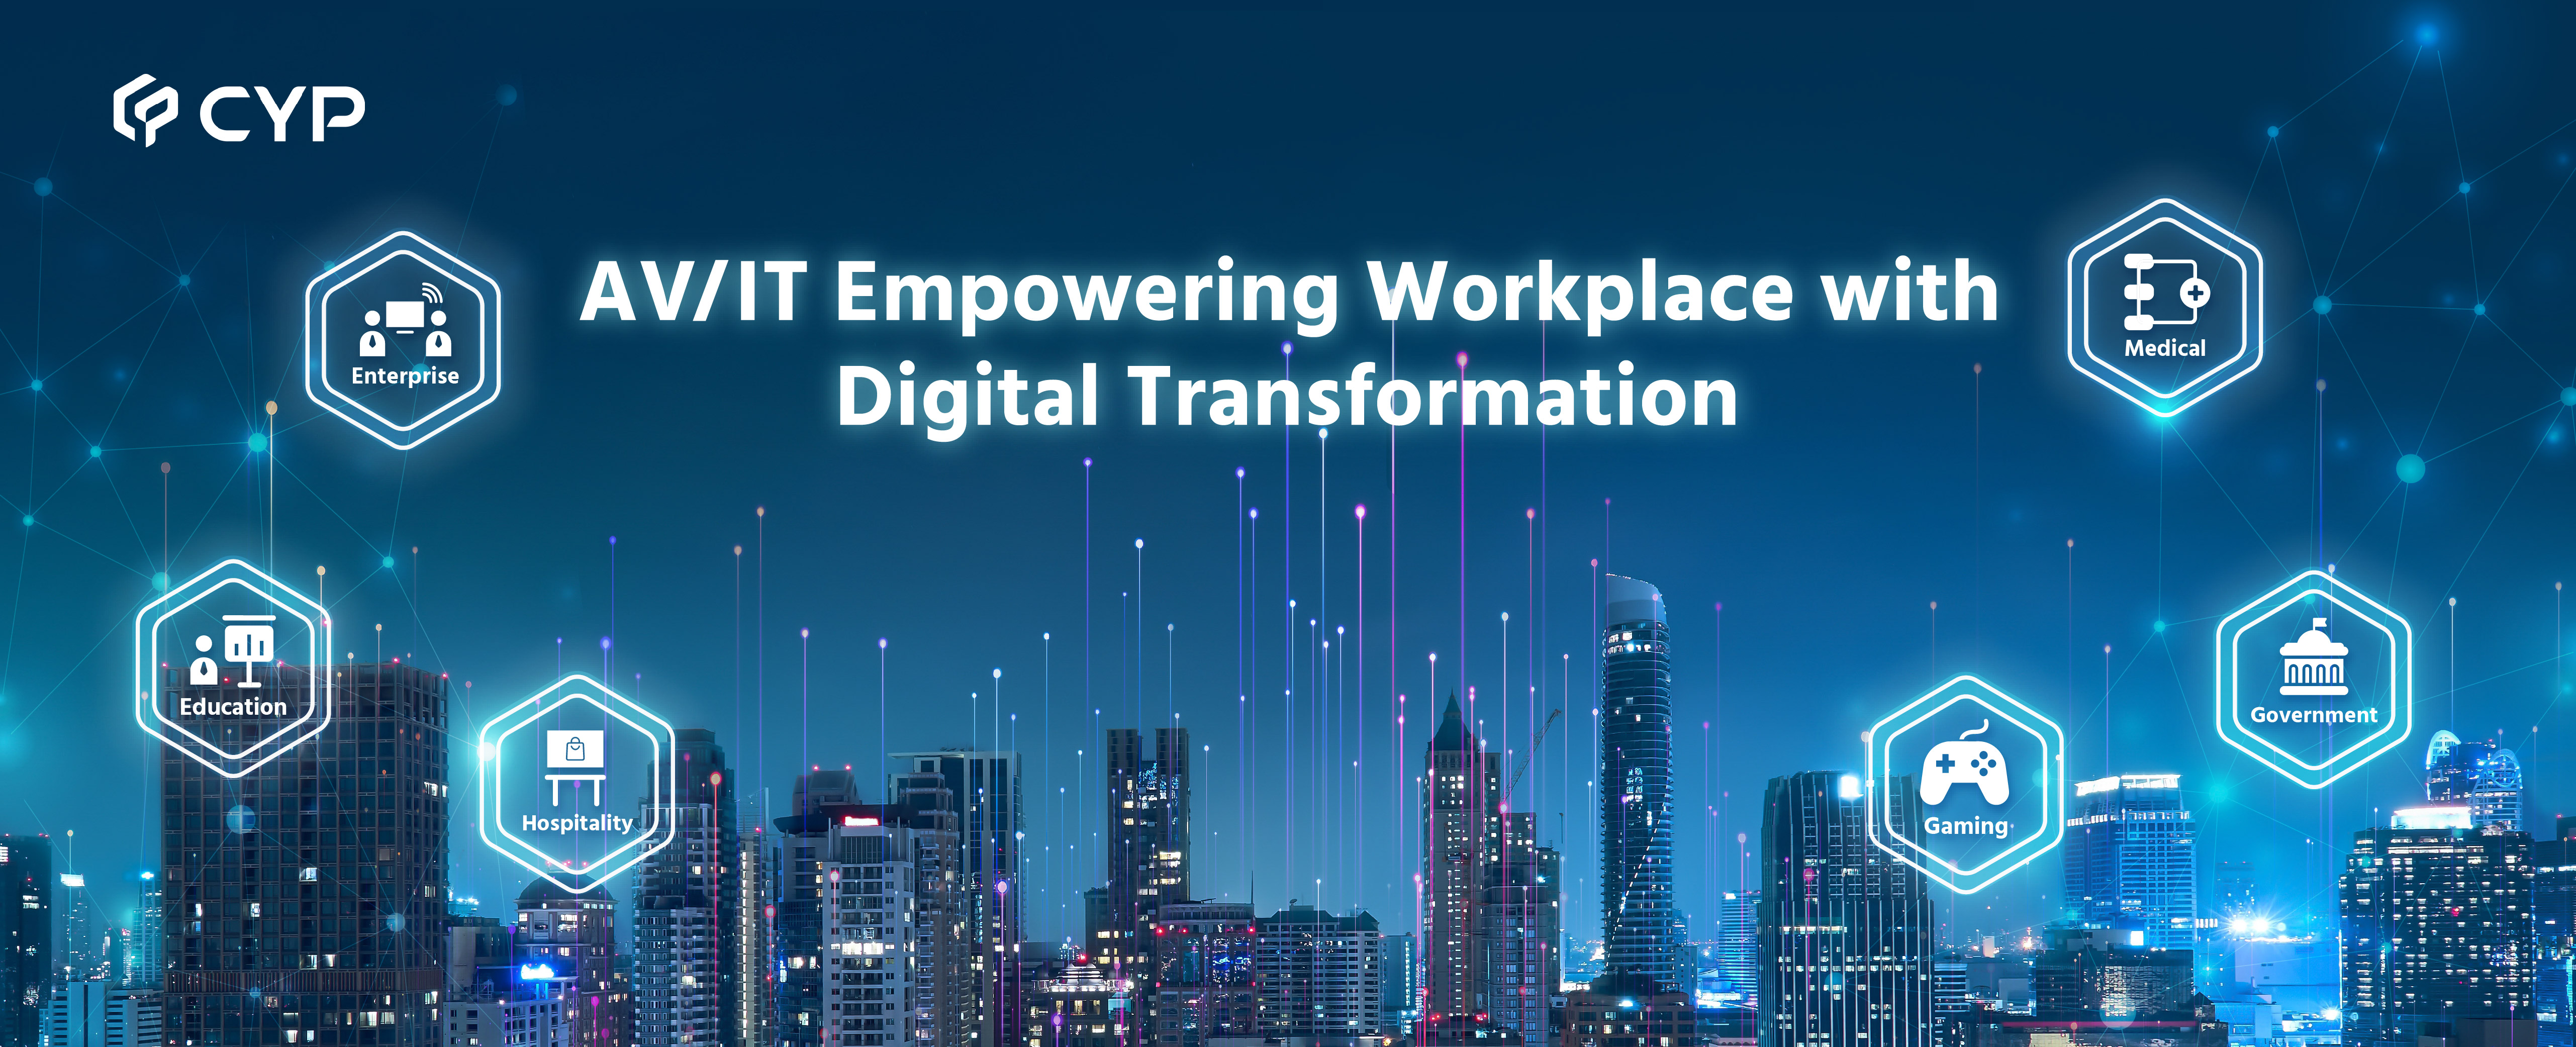 AV/IT Empowering Workplace with  Digital Transformation